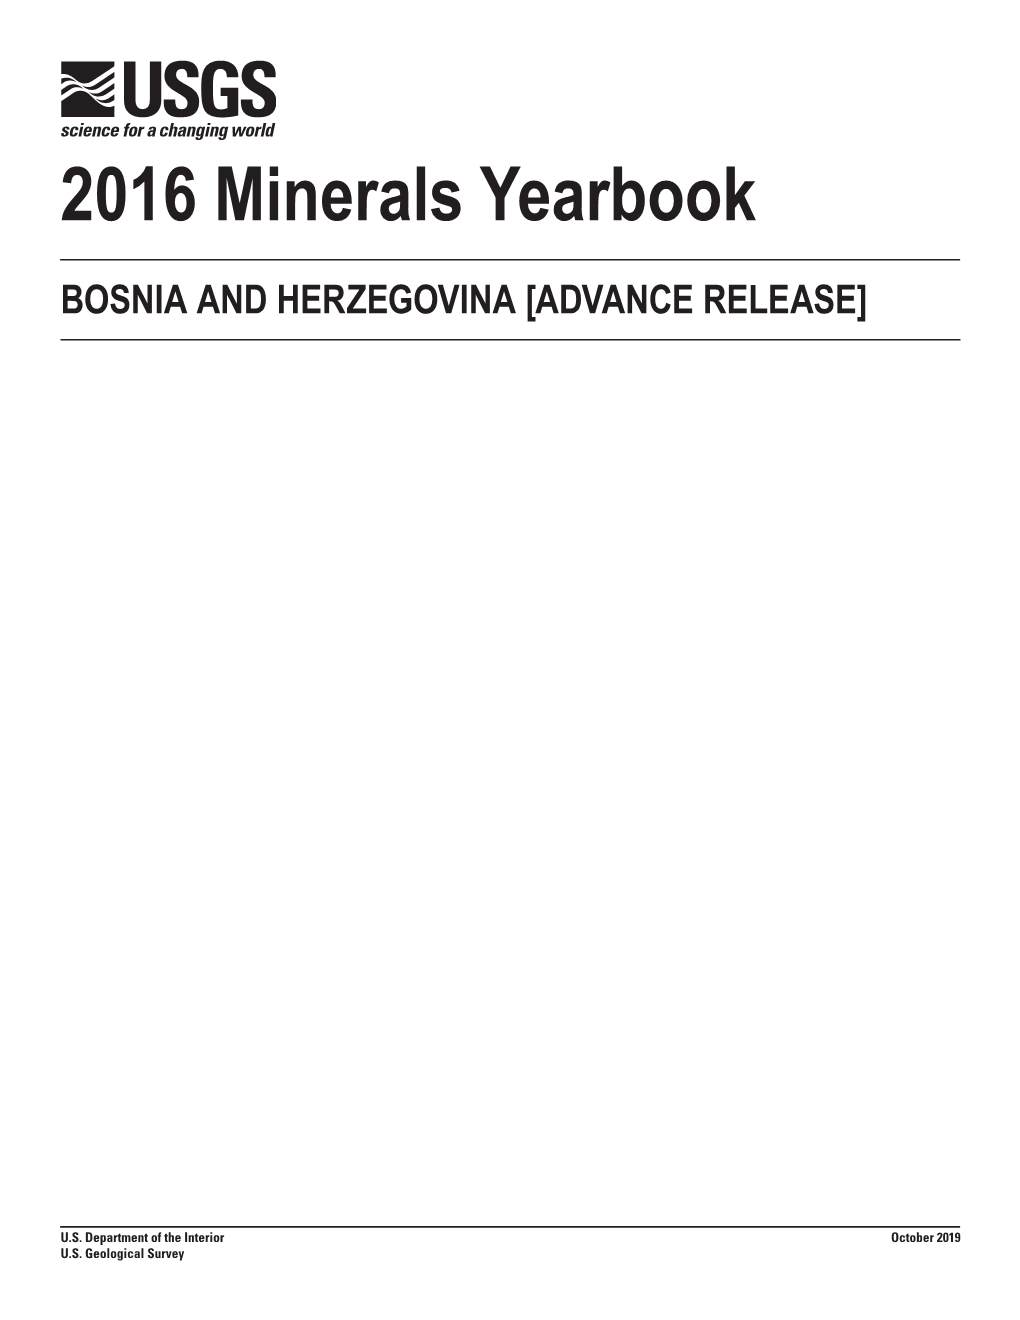 The Mineral Industry of Bosnia and Herzegovina in 2016